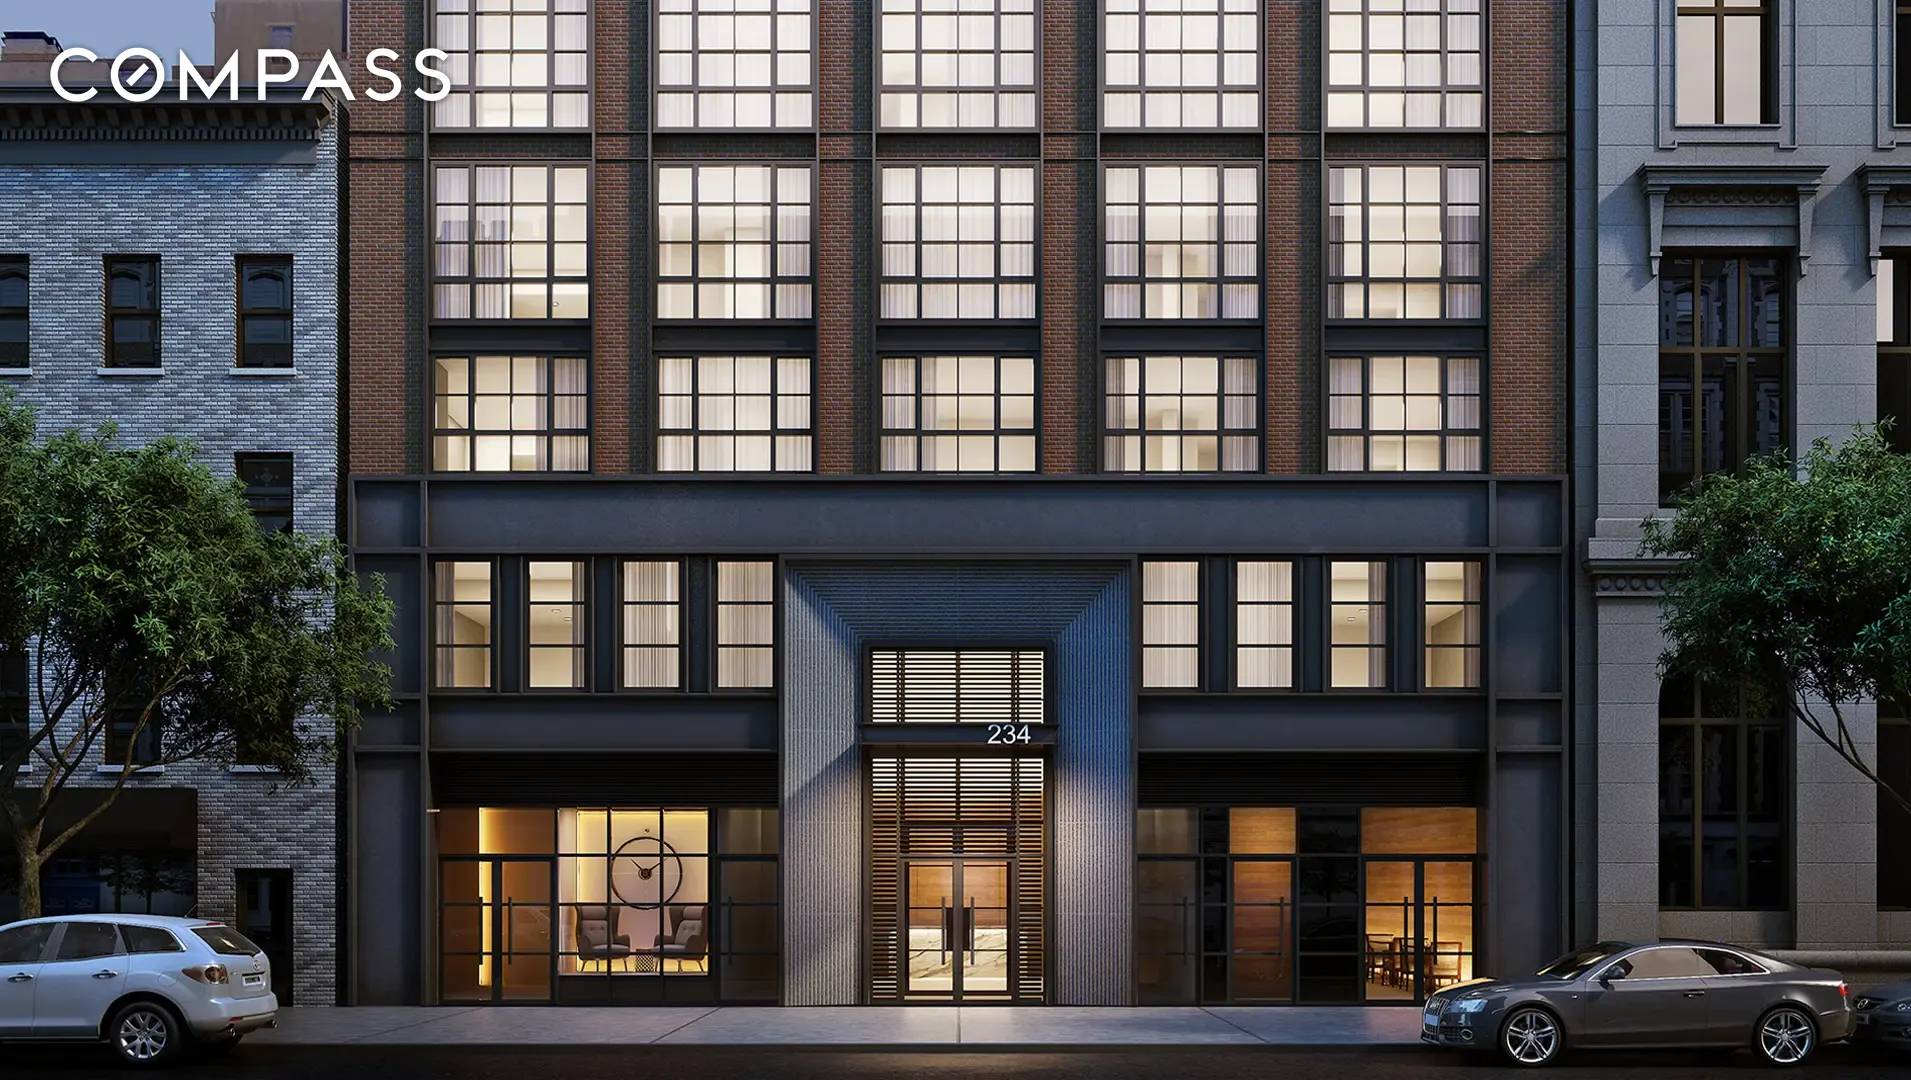 Situated in the heart of Gramercy, 234 East 23rd street is a luxury, full service building with amenities to meet your every need.